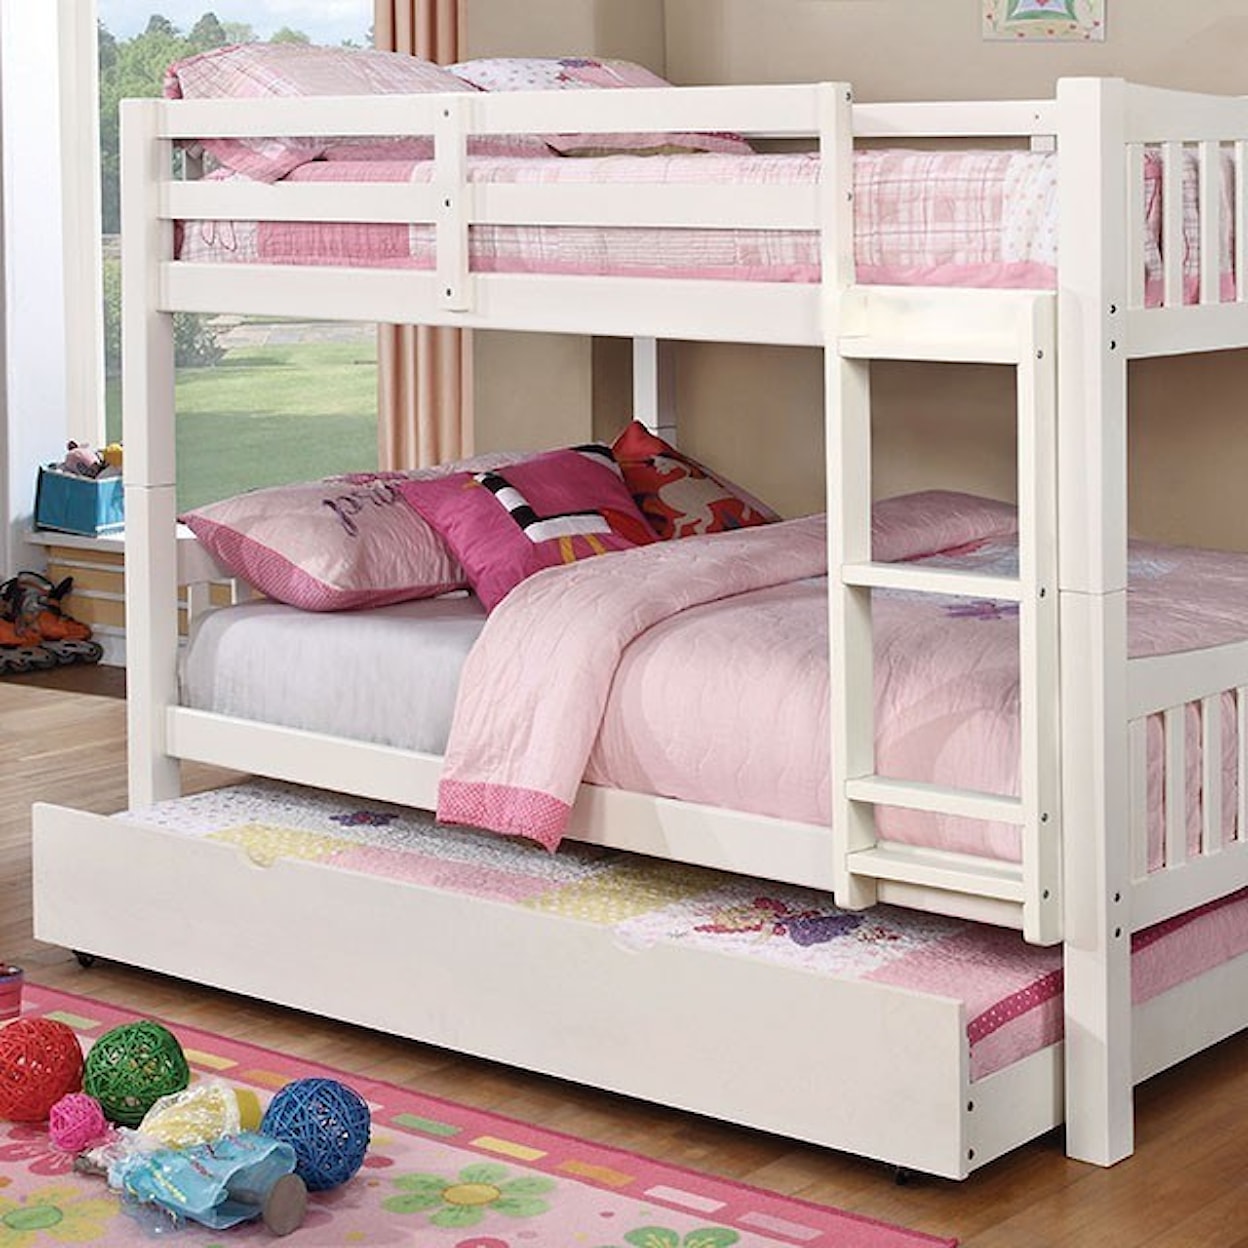 Furniture of America Cameron Full over Full Bunk Bed